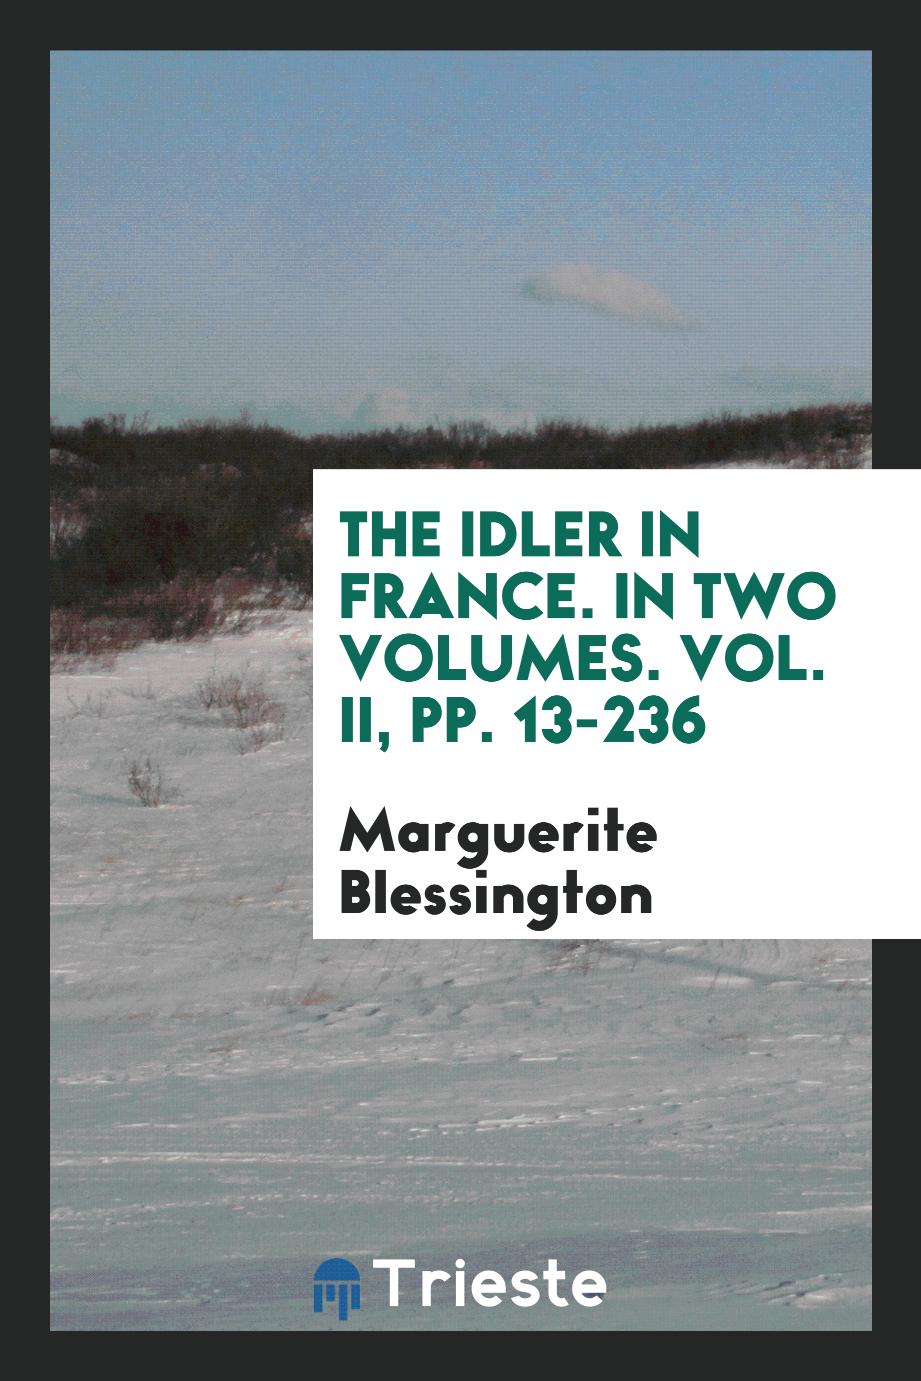 The idler in France. In Two Volumes. Vol. II, pp. 13-236